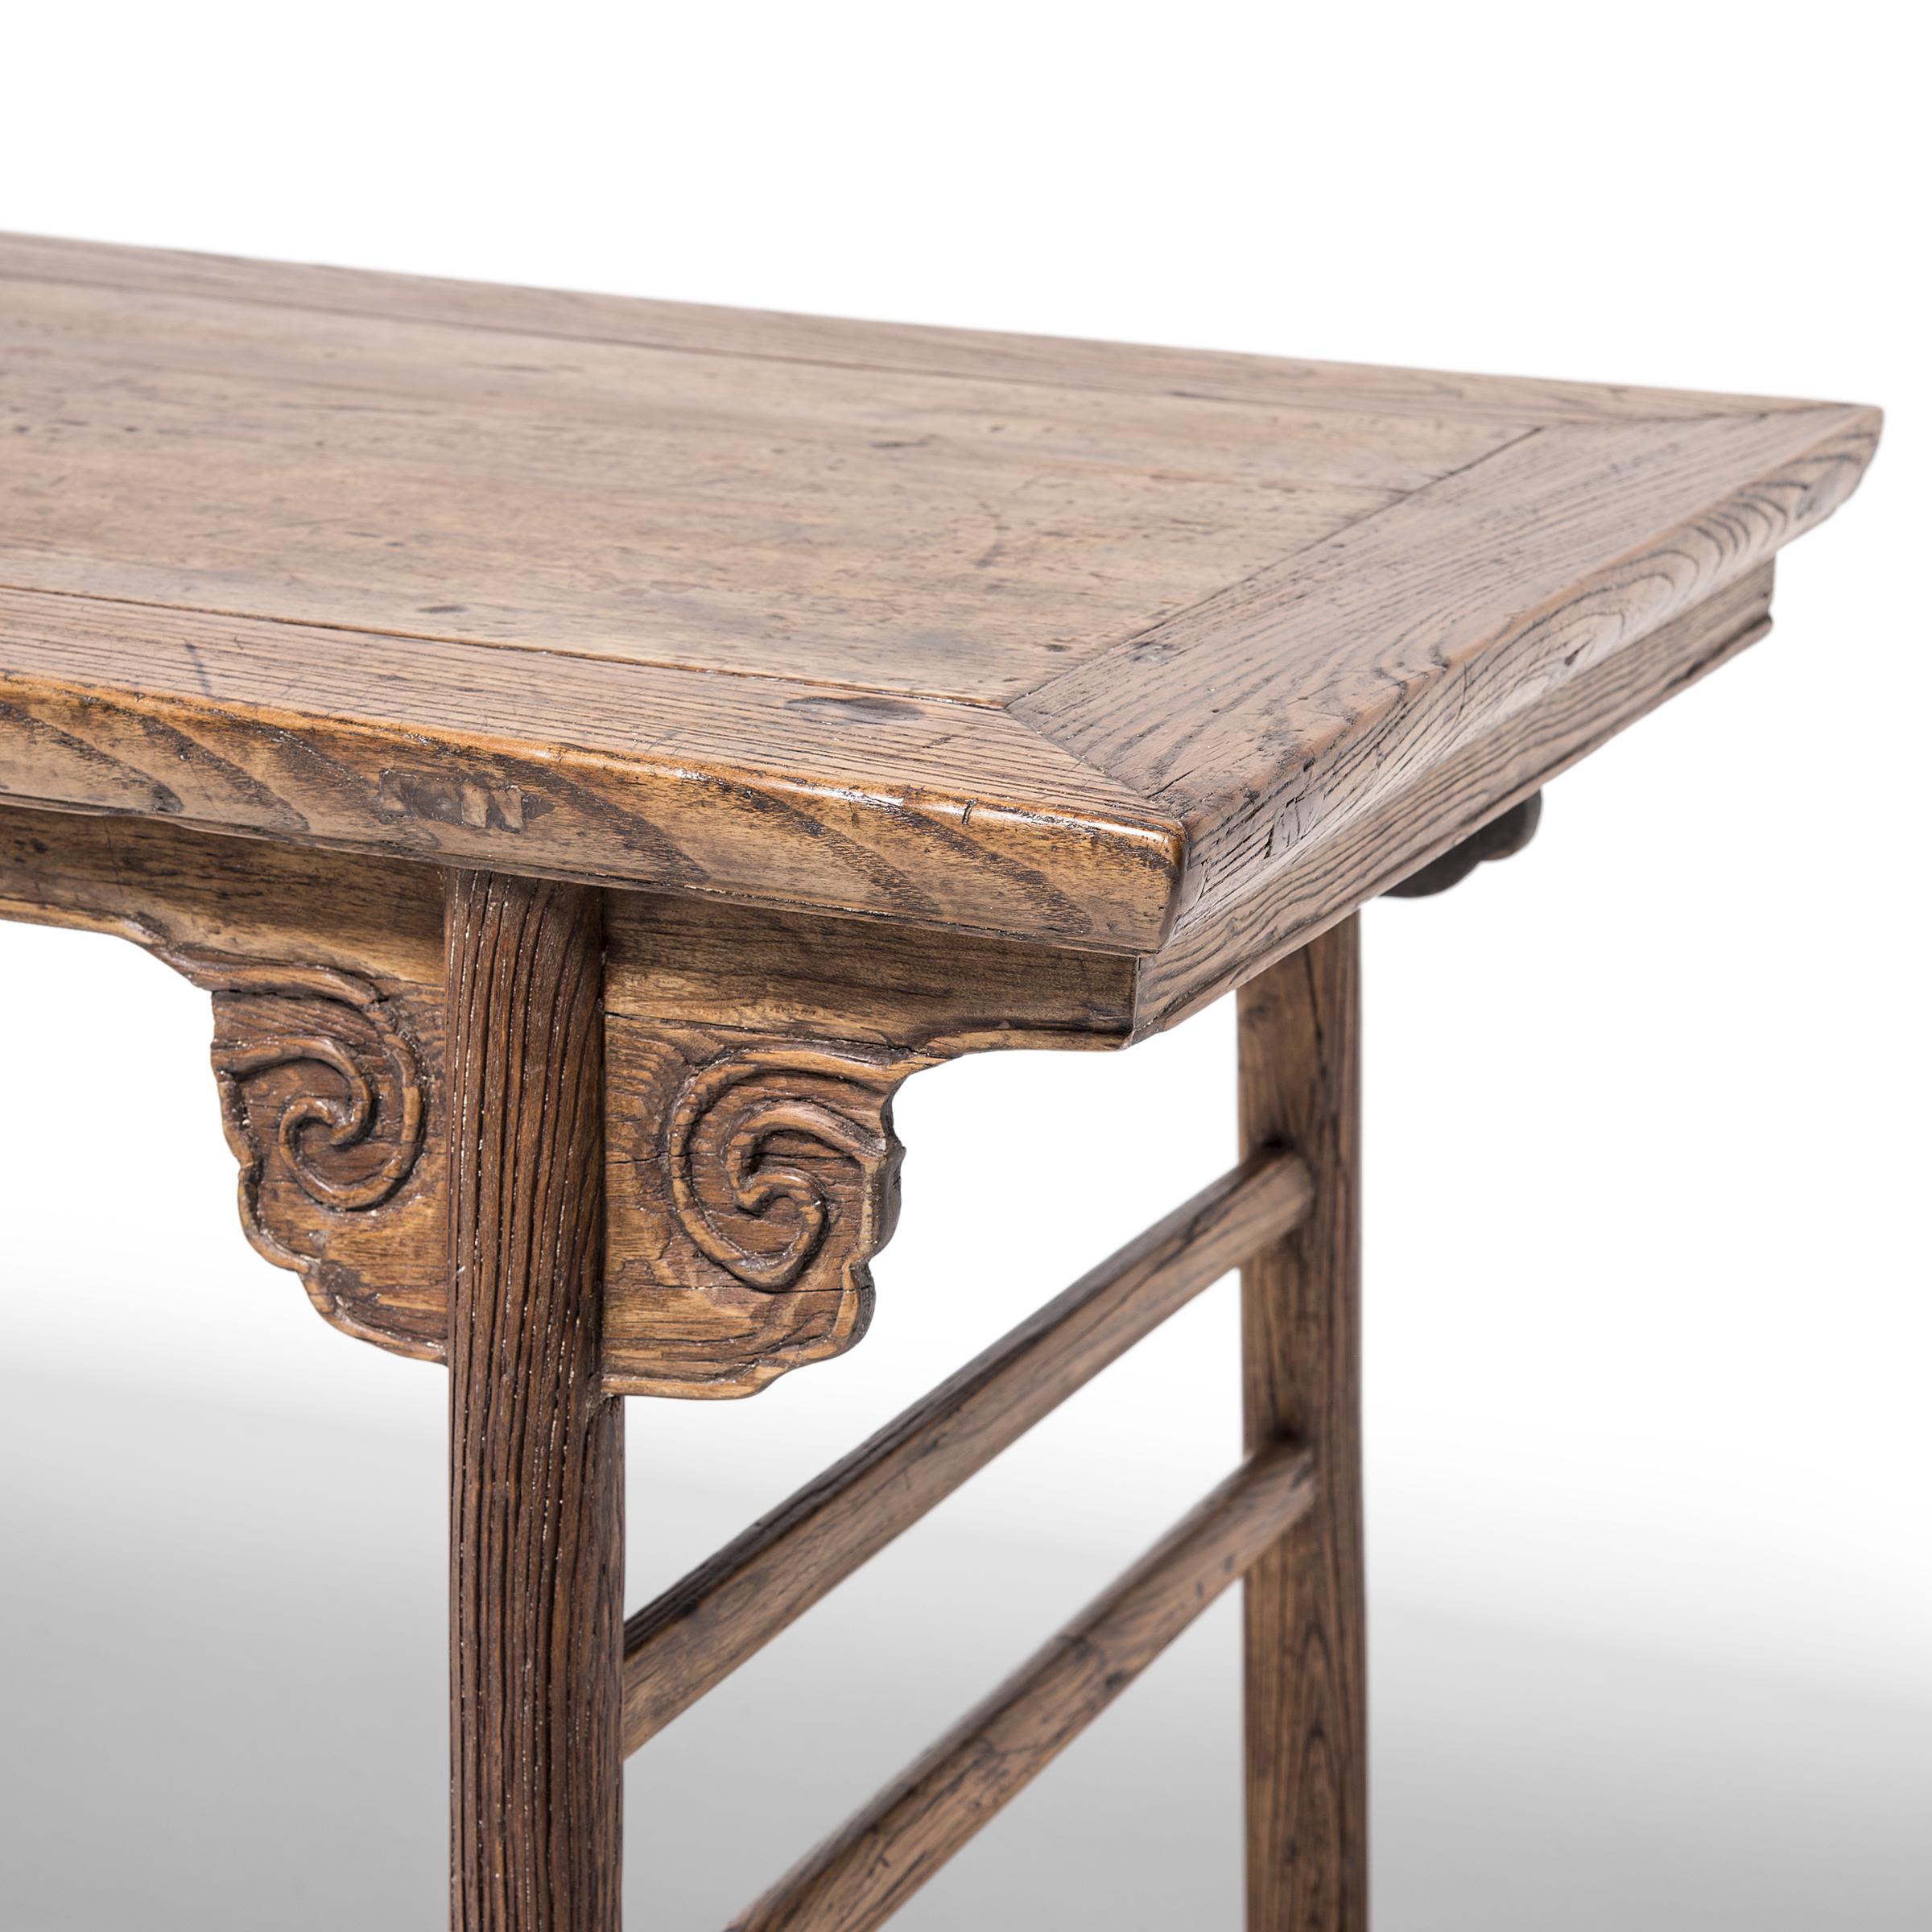 Walnut Chinese Writing Table with Cloud Spandrels, c. 1850 For Sale